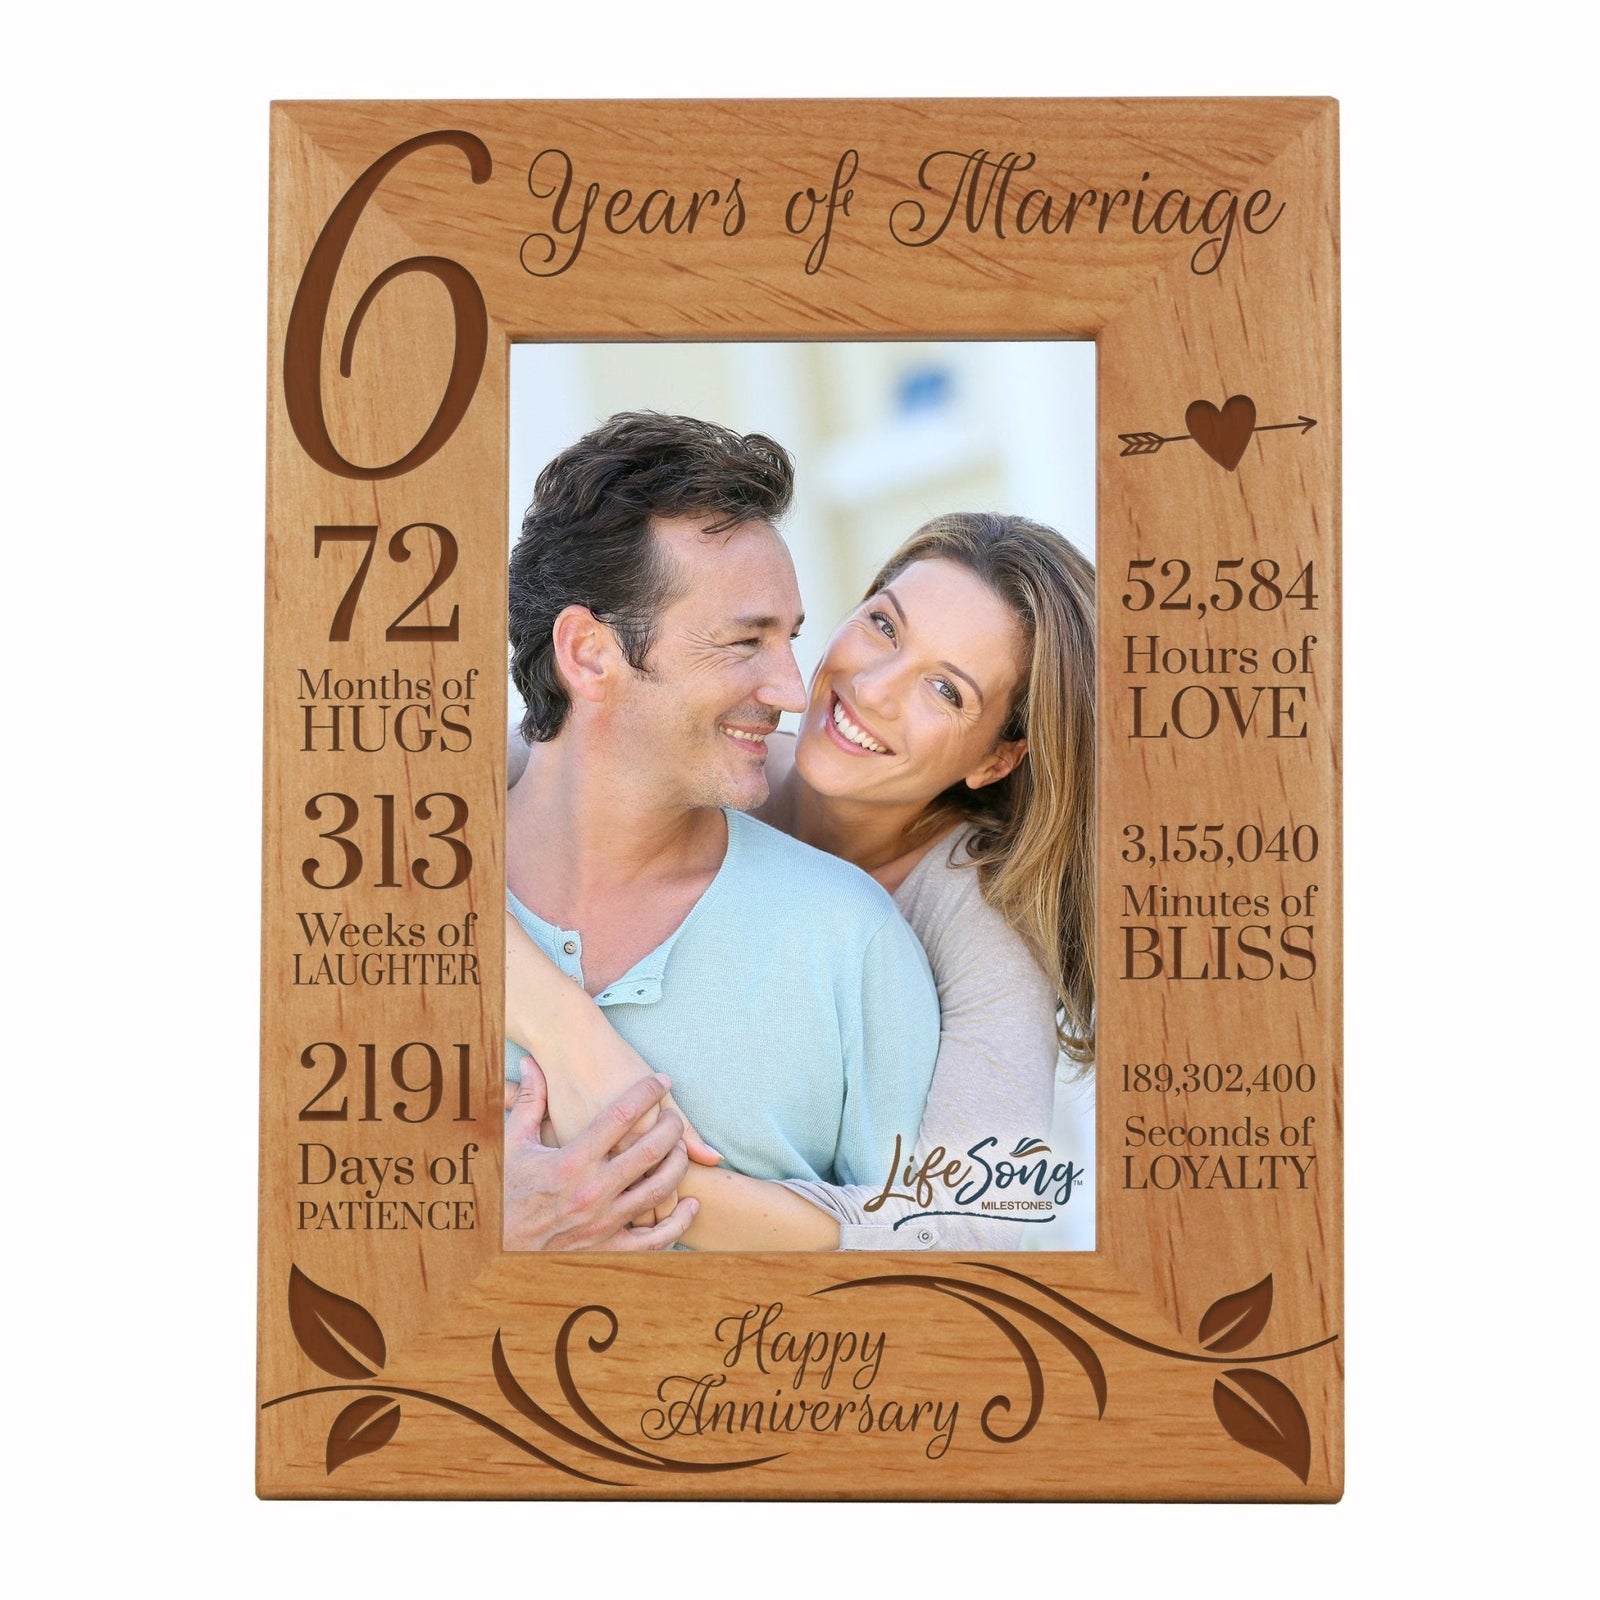 Engraved 6th Wedding Anniversary Photo Frame Wall Decor Gift for Couples - Happy Anniversary - LifeSong Milestones